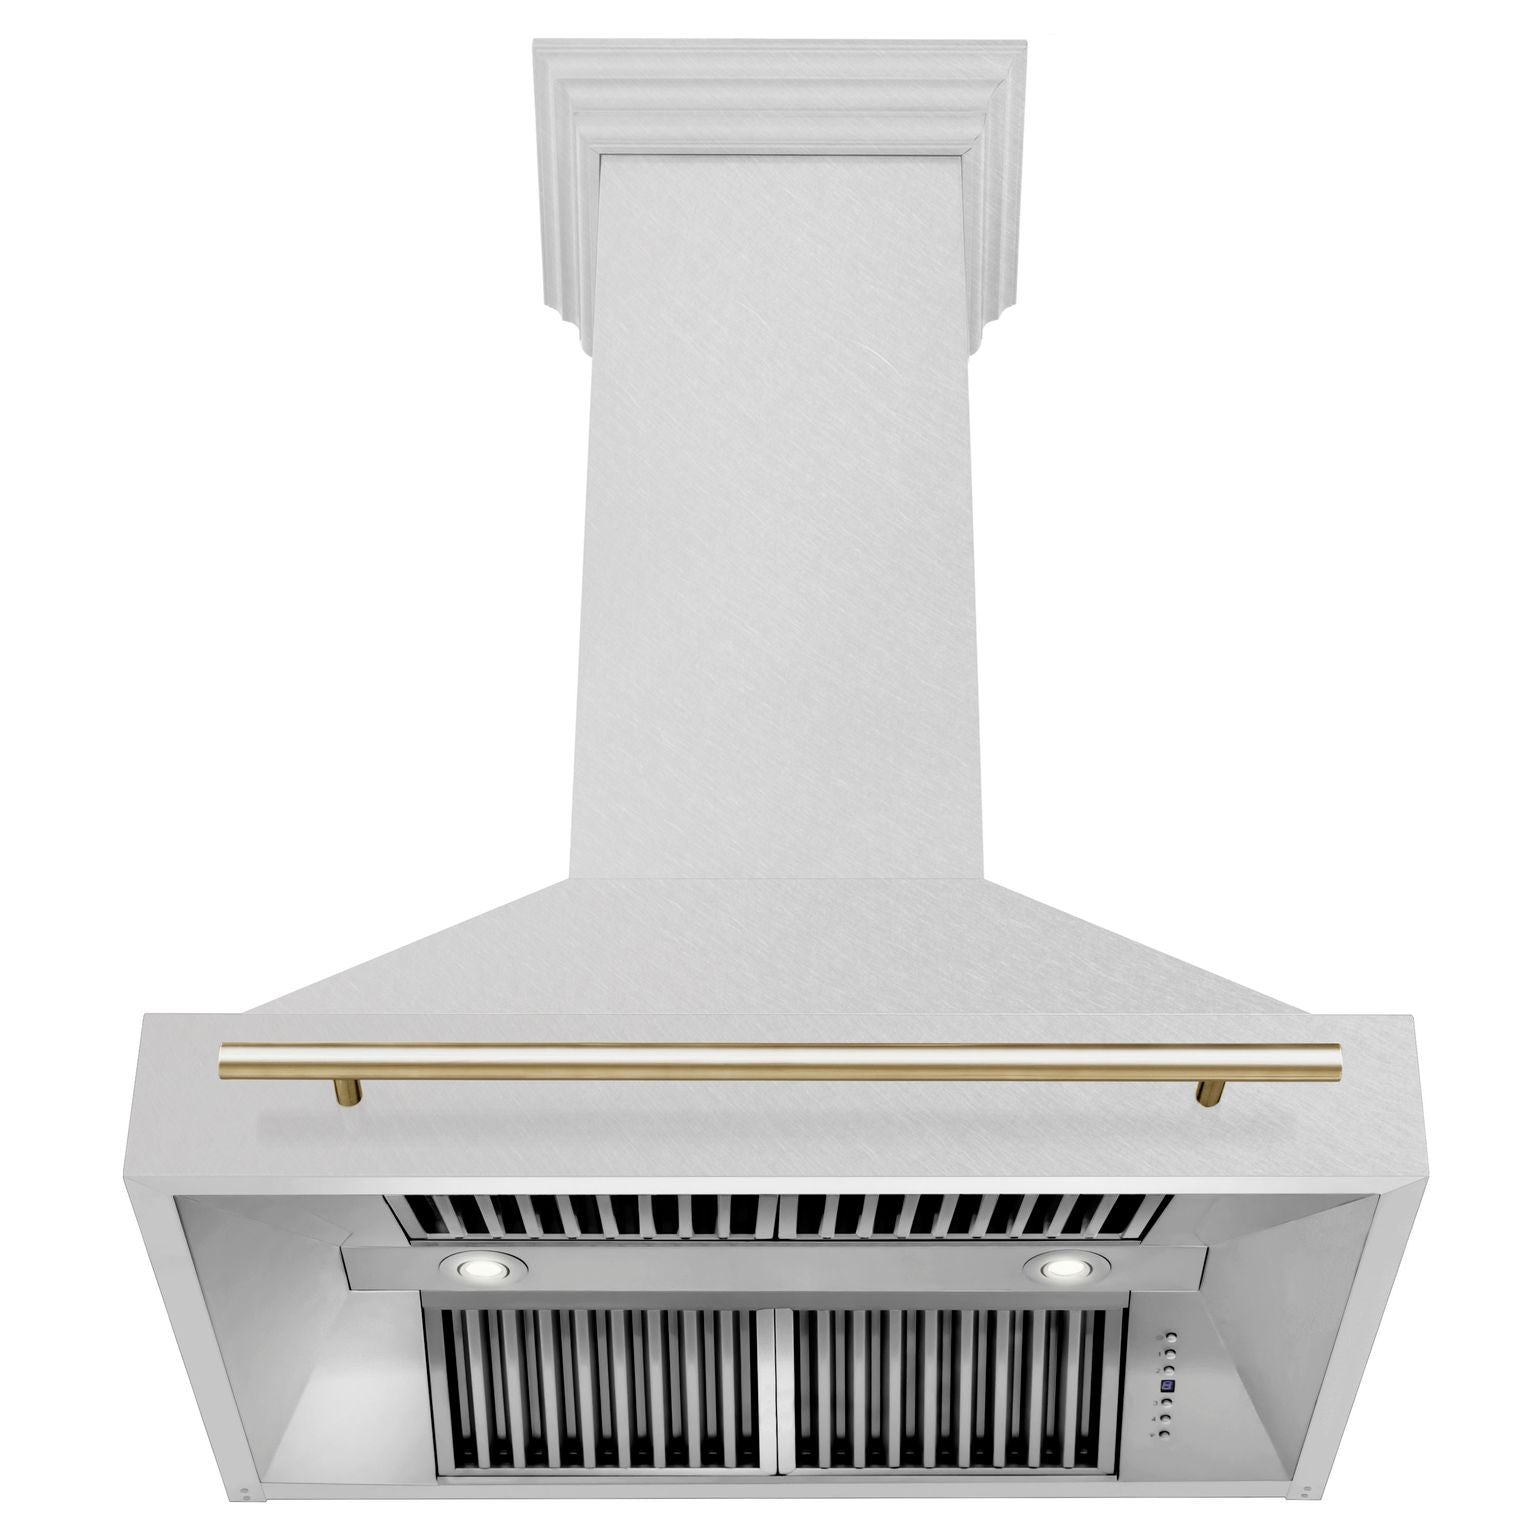 ZLINE Autograph 36 Inch DuraSnow® Stainless Steel Range Hood with DuraSnow® Shell and Gold Handle, 8654SNZ-36-G